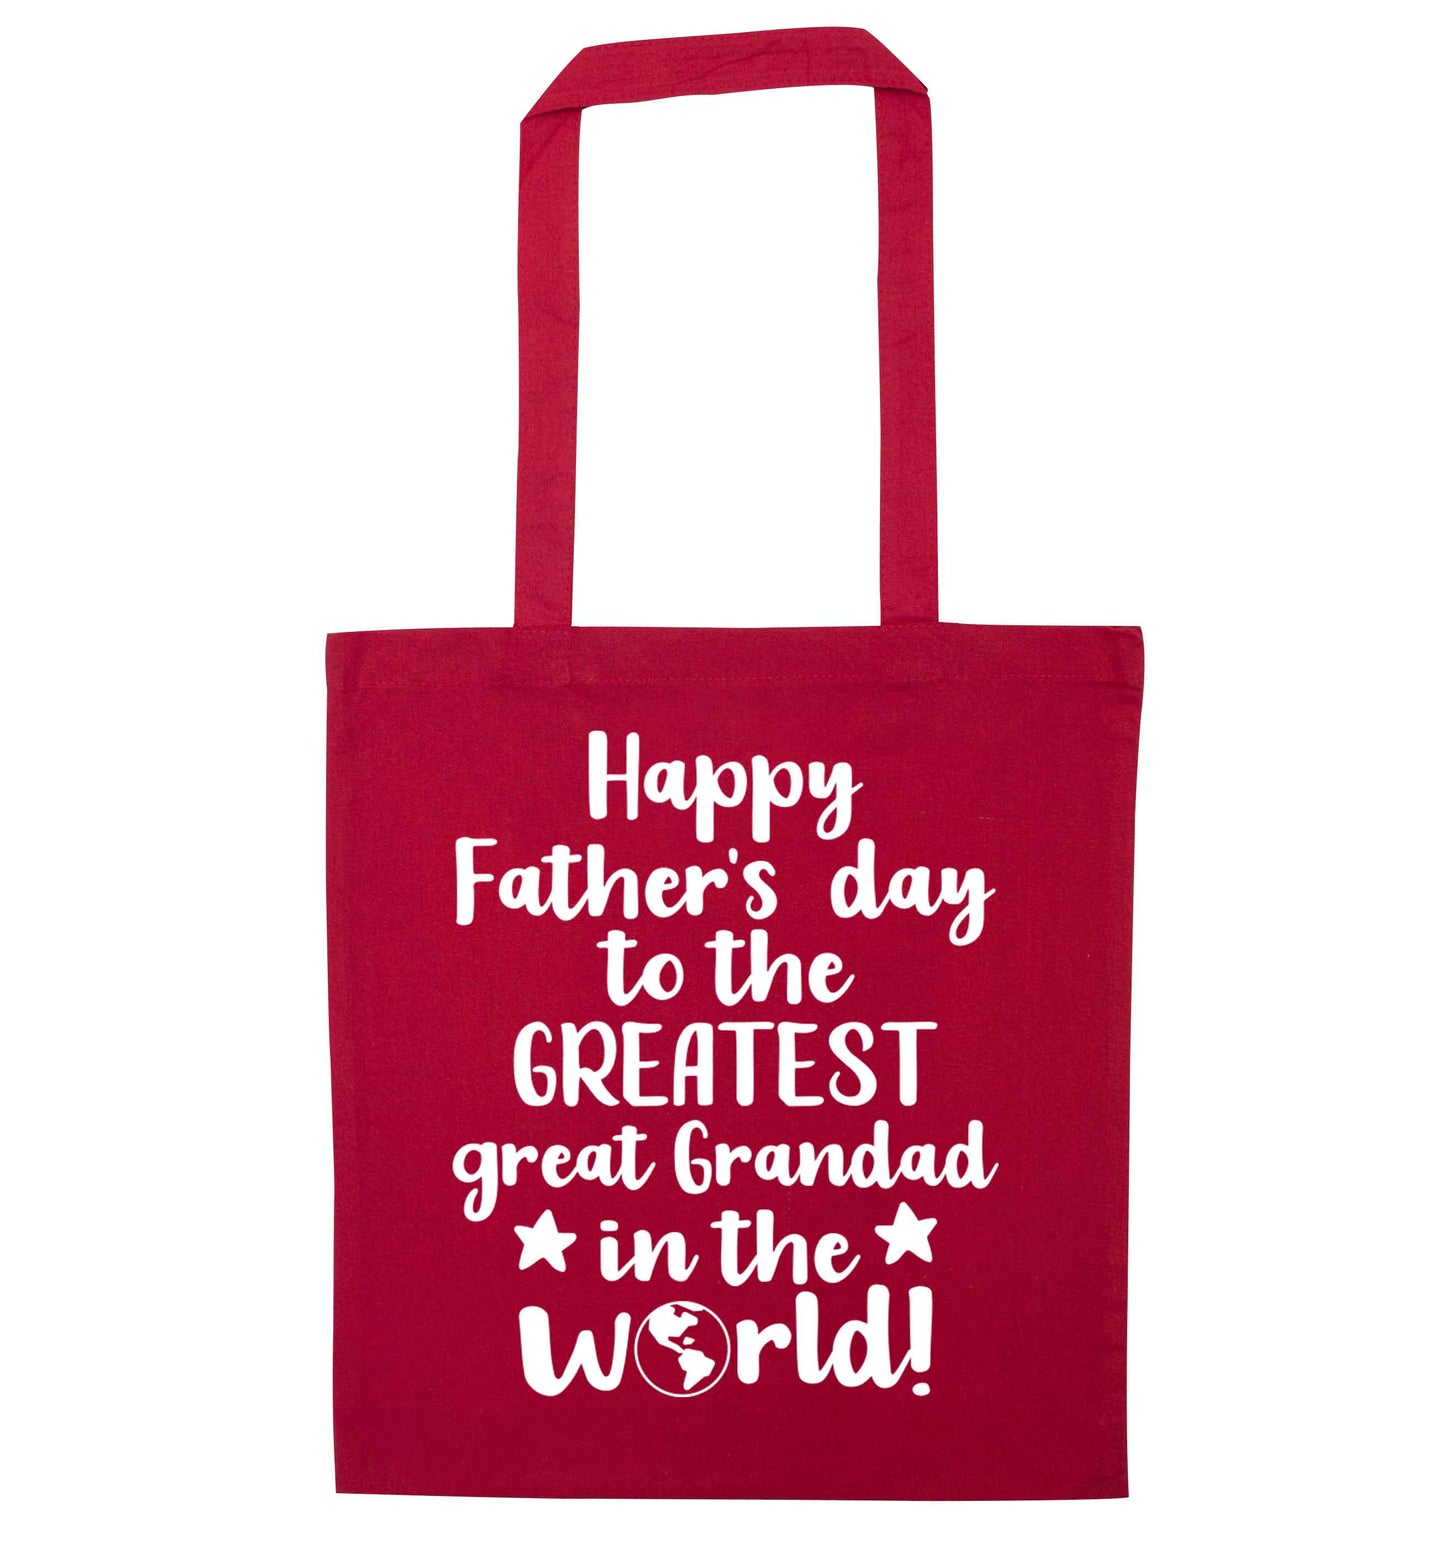 Happy Father's day to the greatest great grandad in the world red tote bag